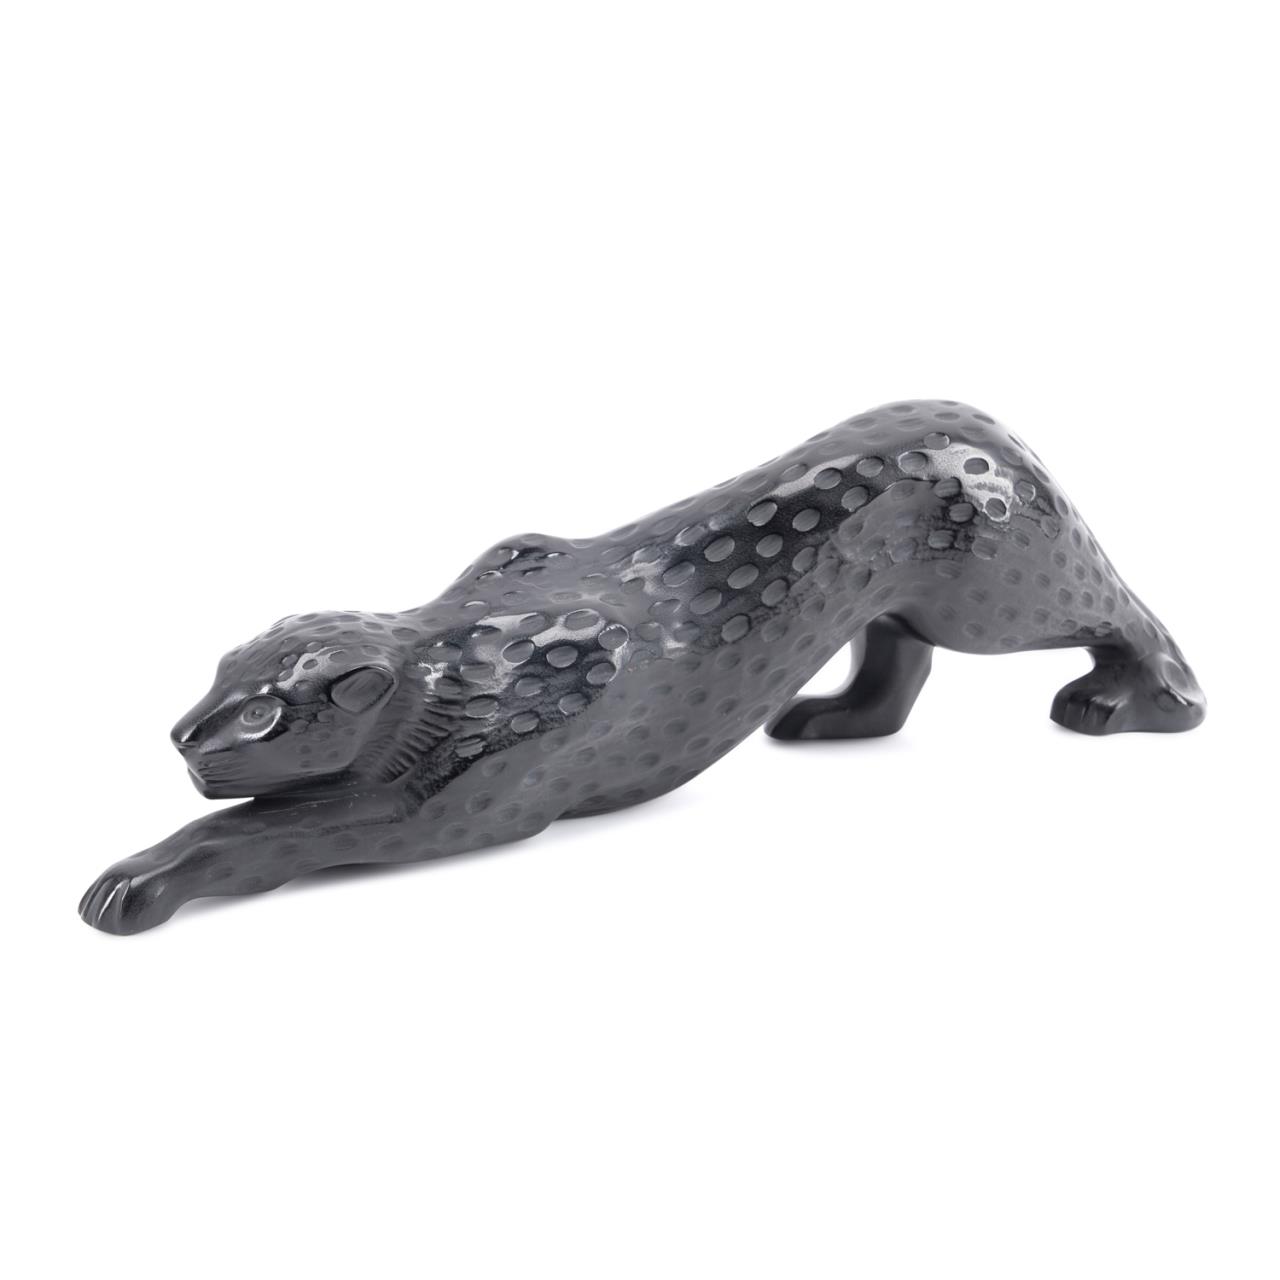 LALIQUE ZEILA BLACK PANTHER FIGURE 2bfd9b